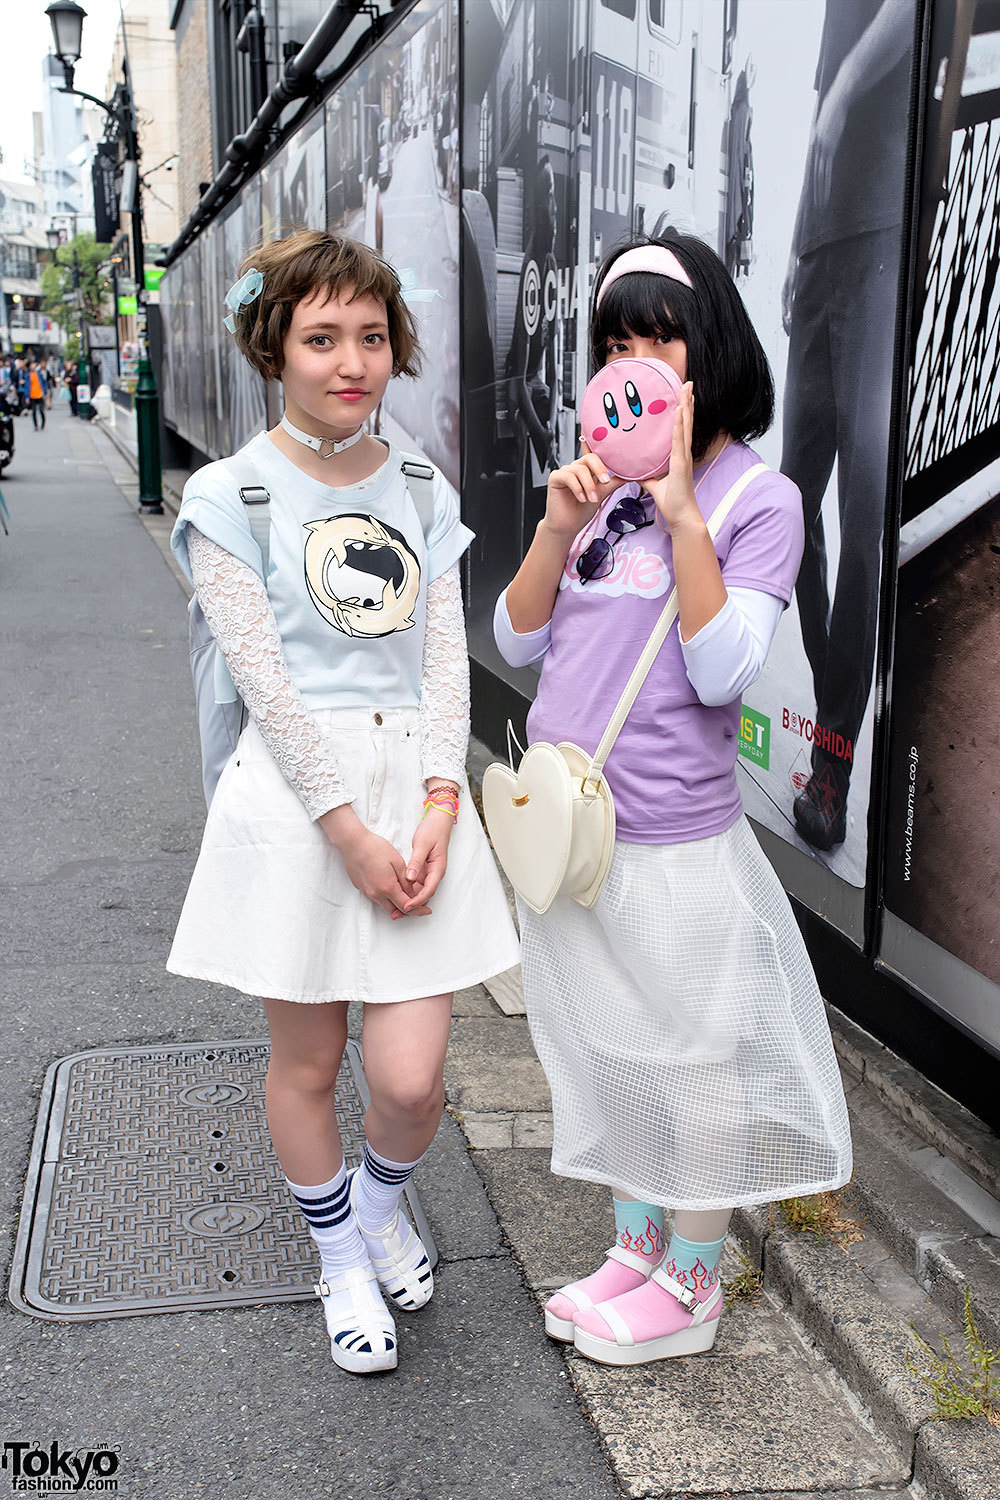 17-year-old Hana and 15-year-old Nachi on the street in Harajuku. Hana is wearing a Bubbles top with a WEGO skirt and ANAP platform sandals. Nachi is wearing a Bubbles top with a Bubbles sheer skirt and Spinns platform sandals.